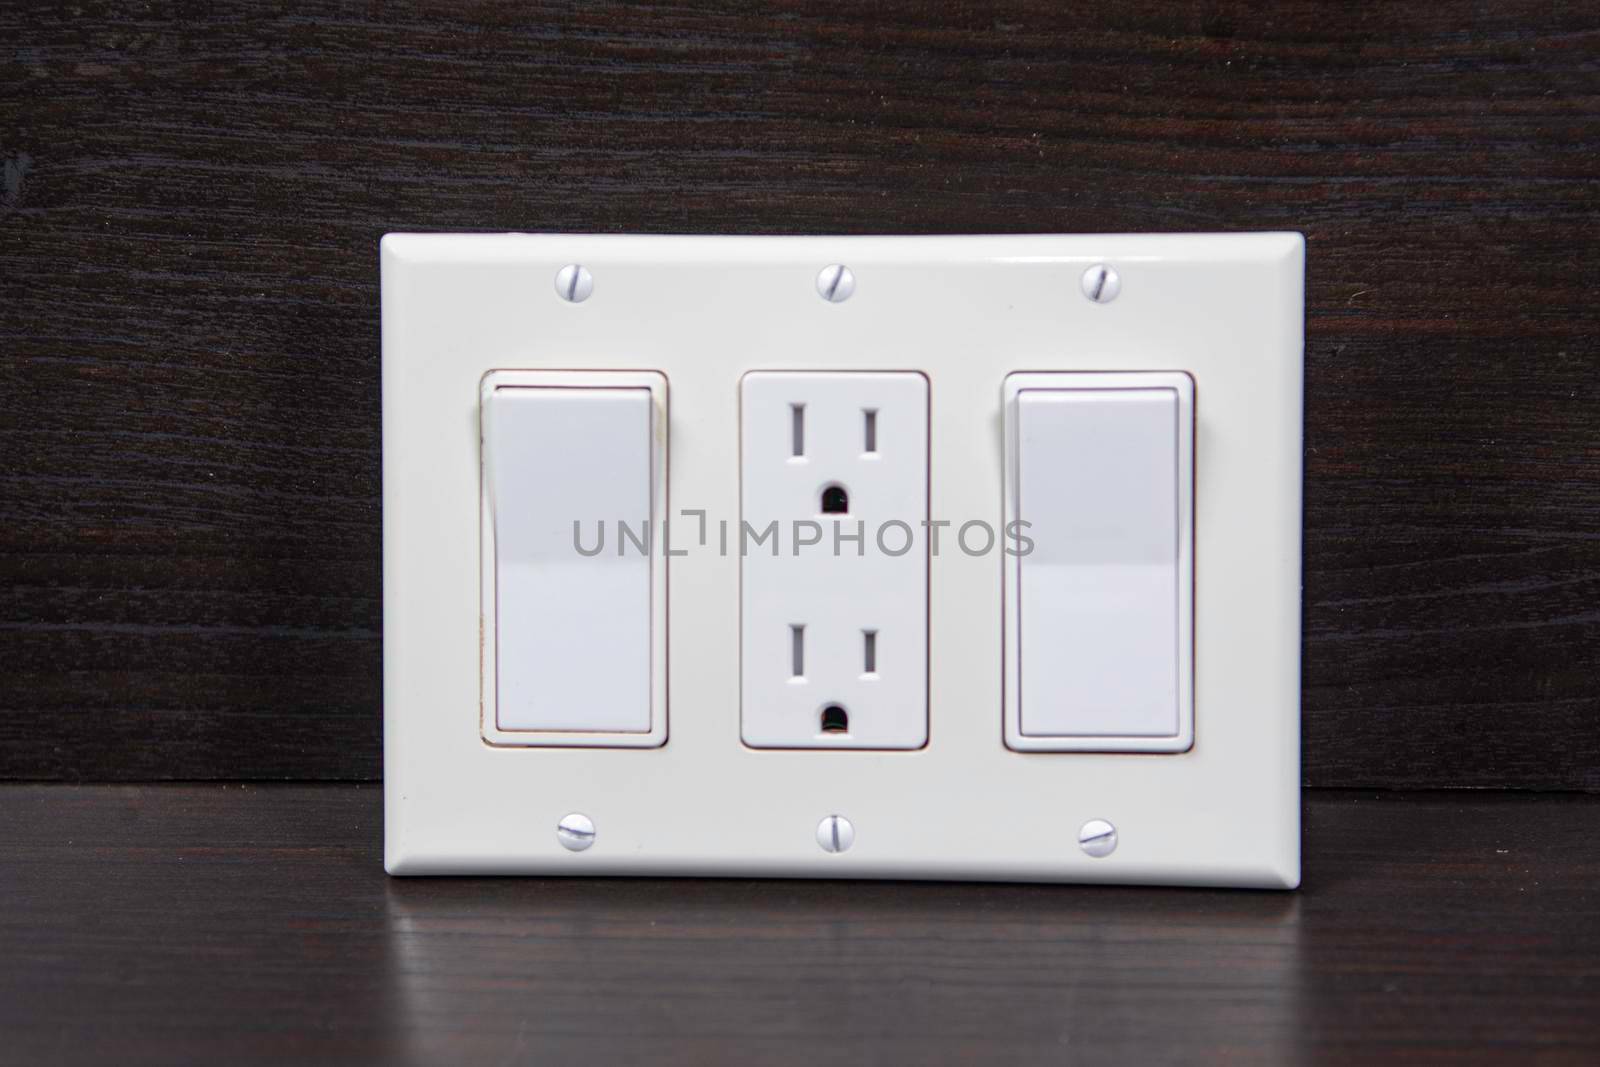 Two switches and a socket in the middle are covered with one triple decorative white overlay